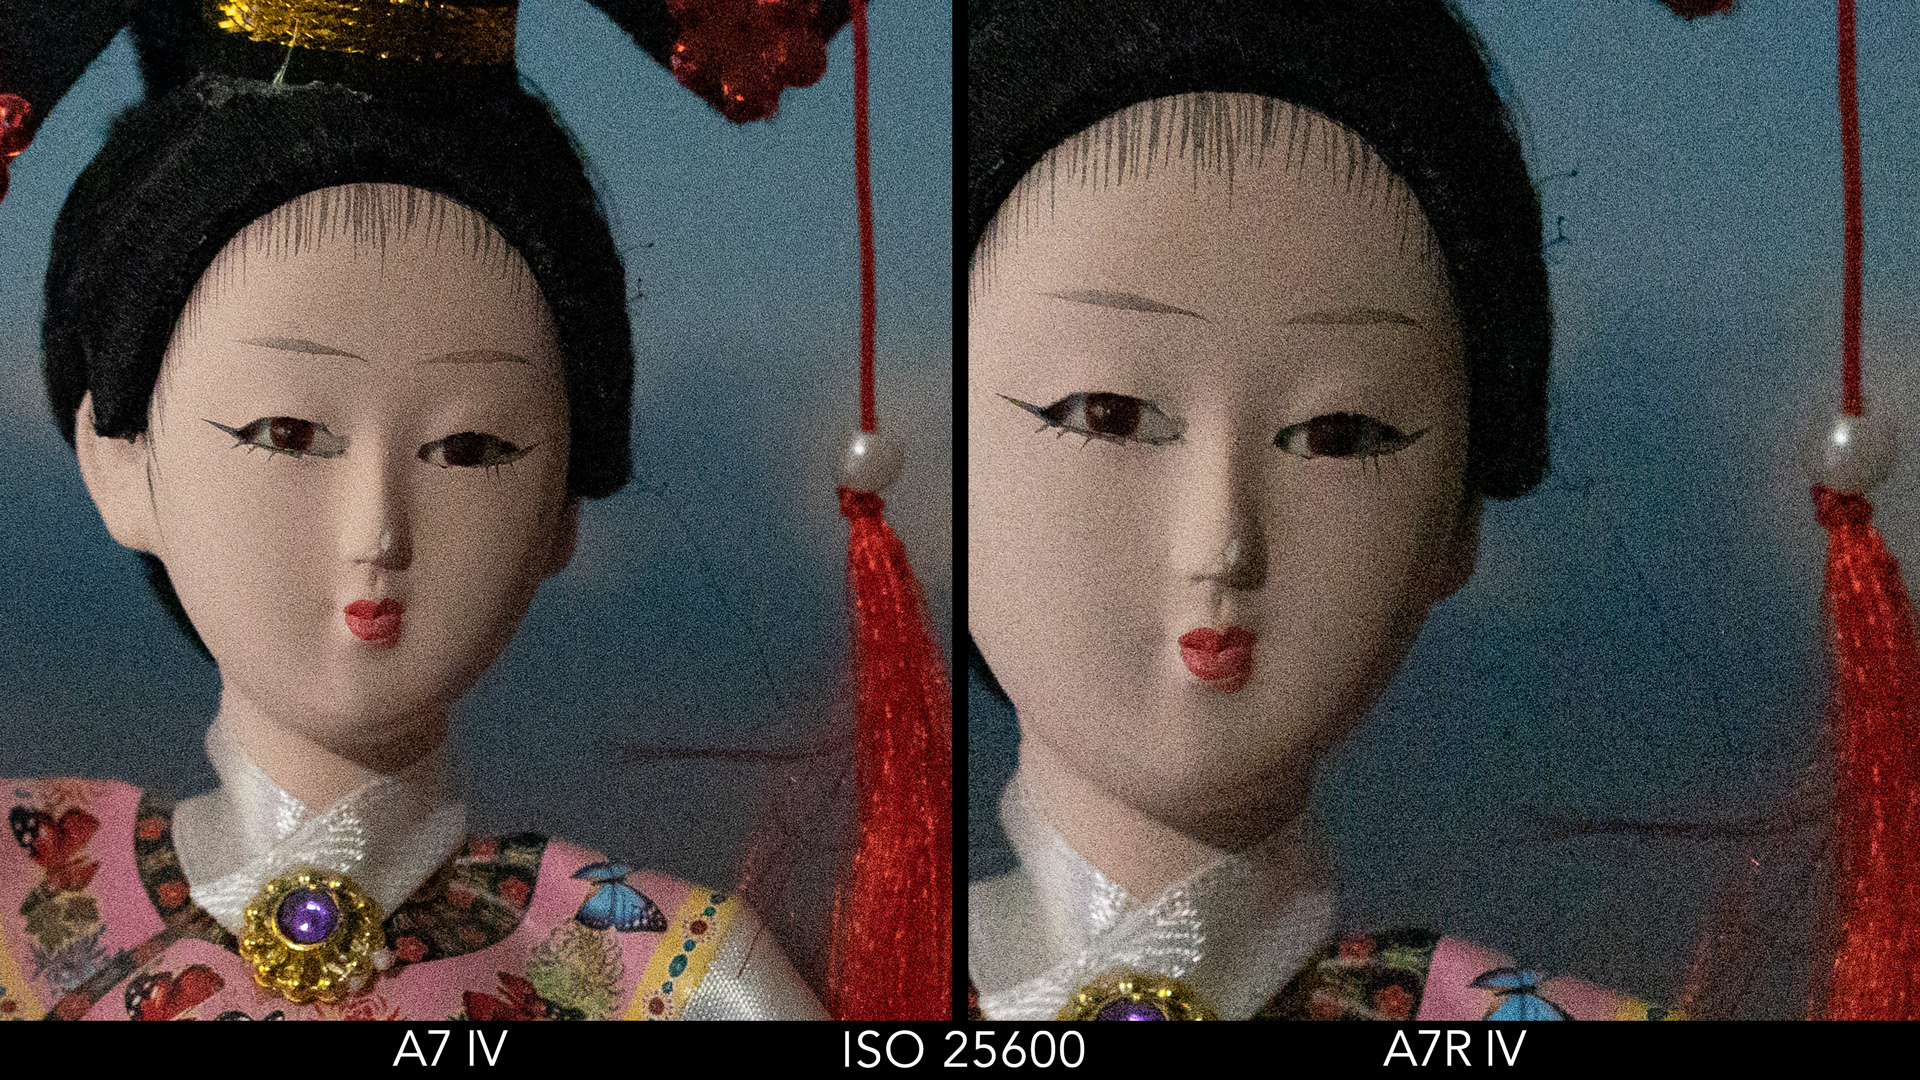 Side by side crop showing the quality at ISO 25600 for the A7 IV and A7R IV